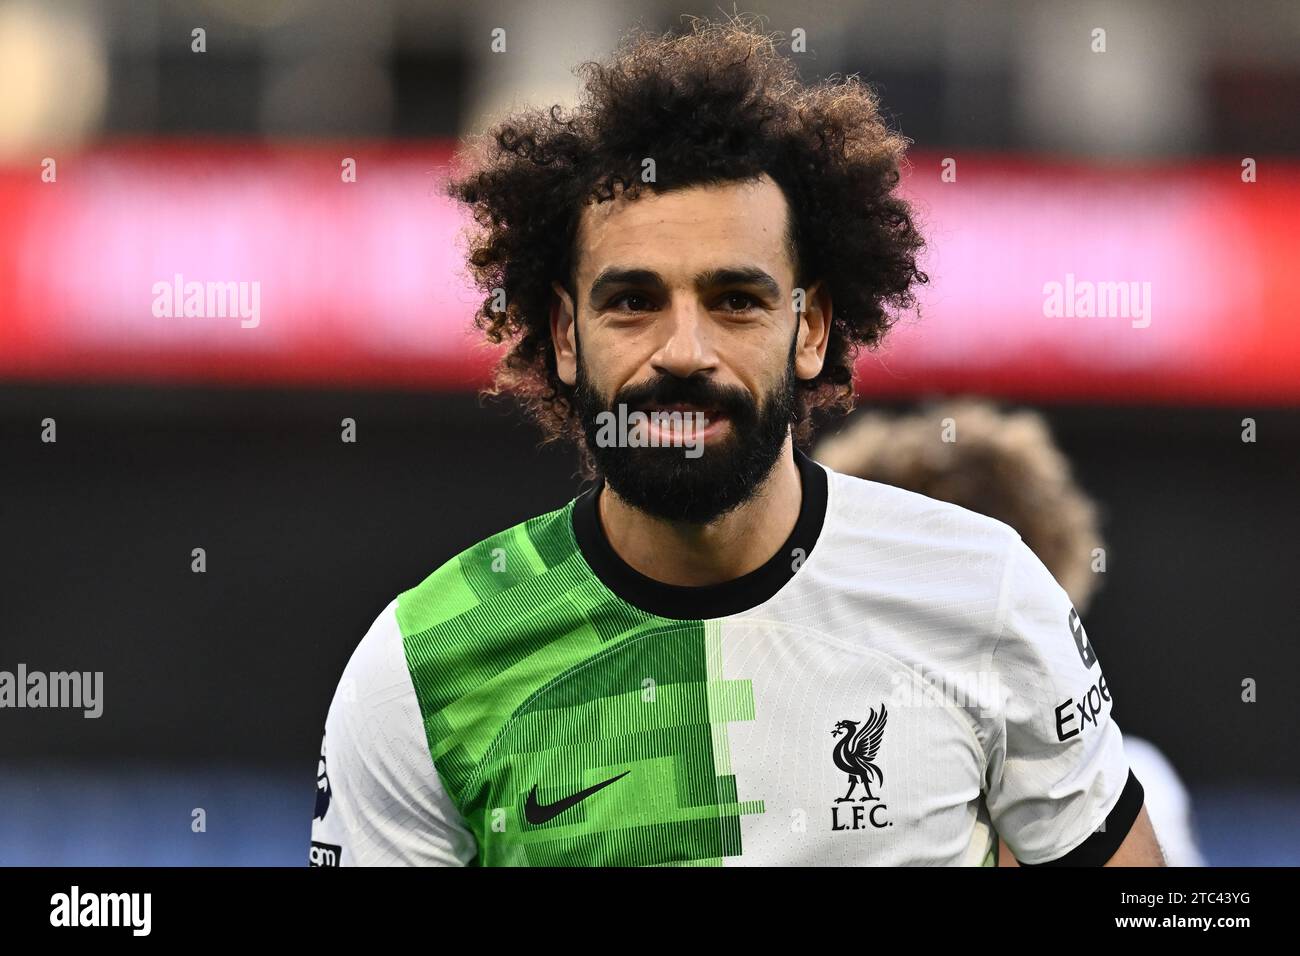 LONDON, ENGLAND - DECEMBER 9: Mohamed Salah of Liverpool FC looks on during the Premier League match between Crystal Palace and Liverpool FC at Selhur Stock Photo